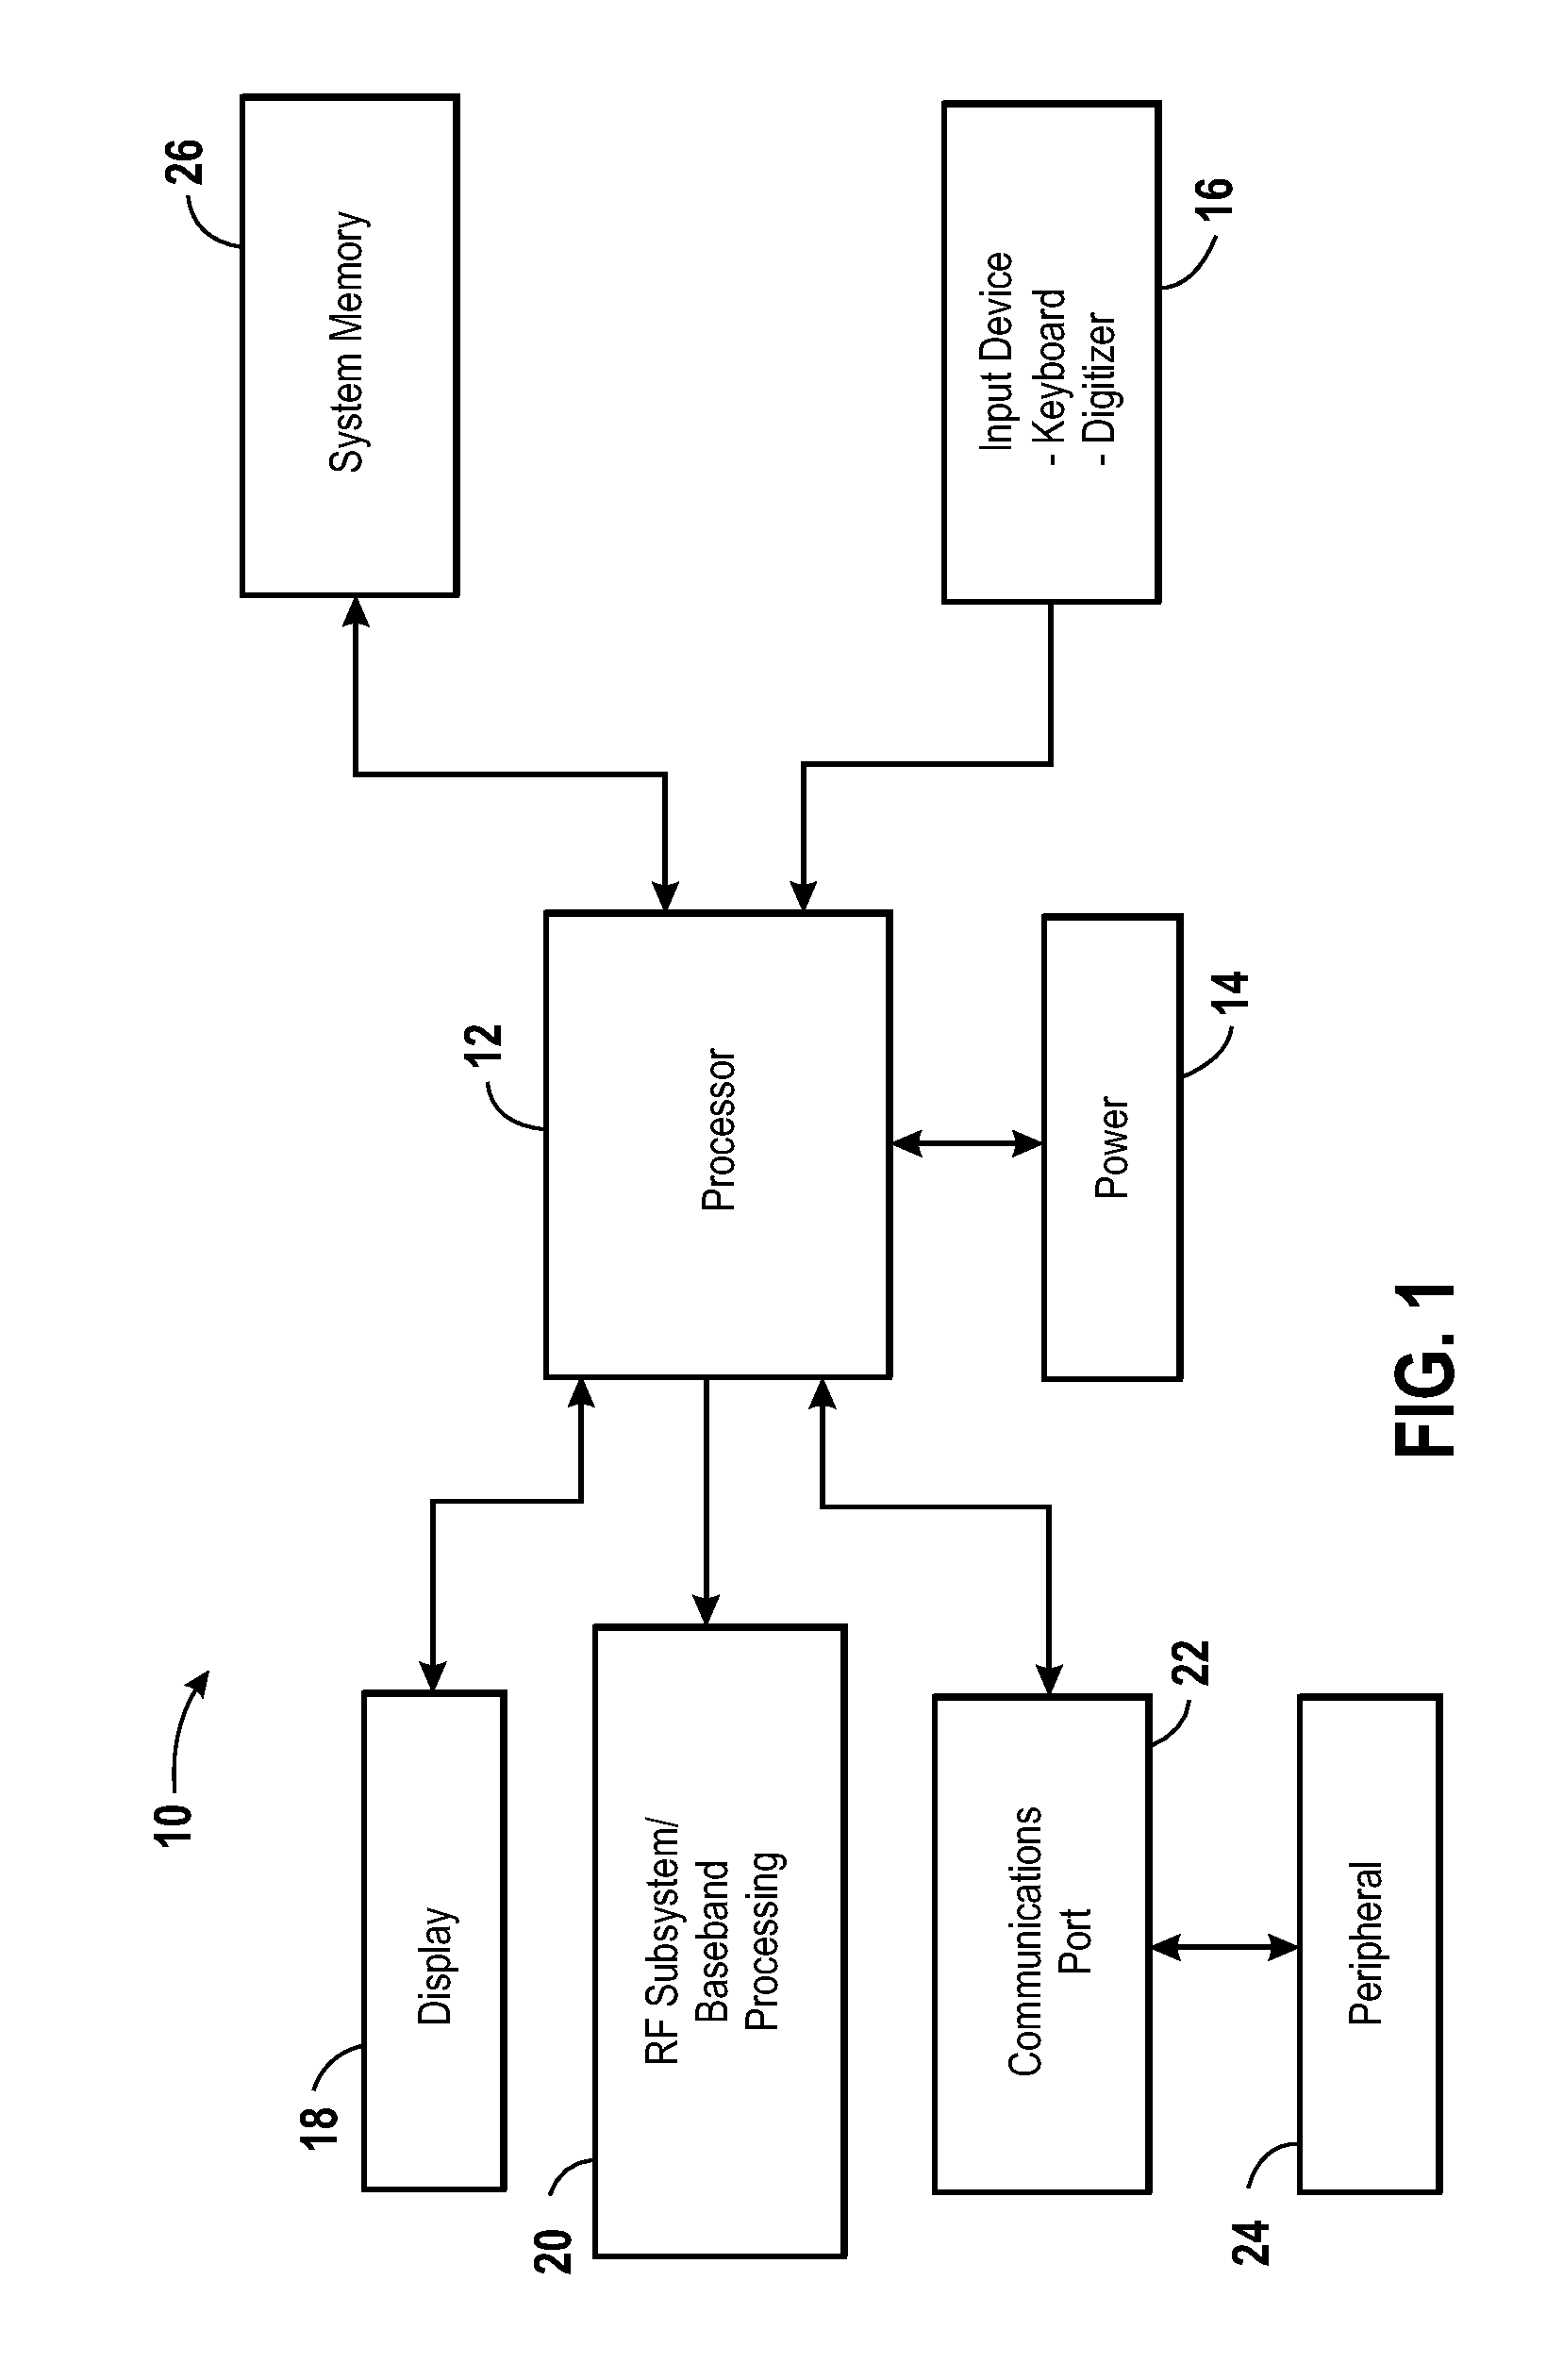 Biasing system and method